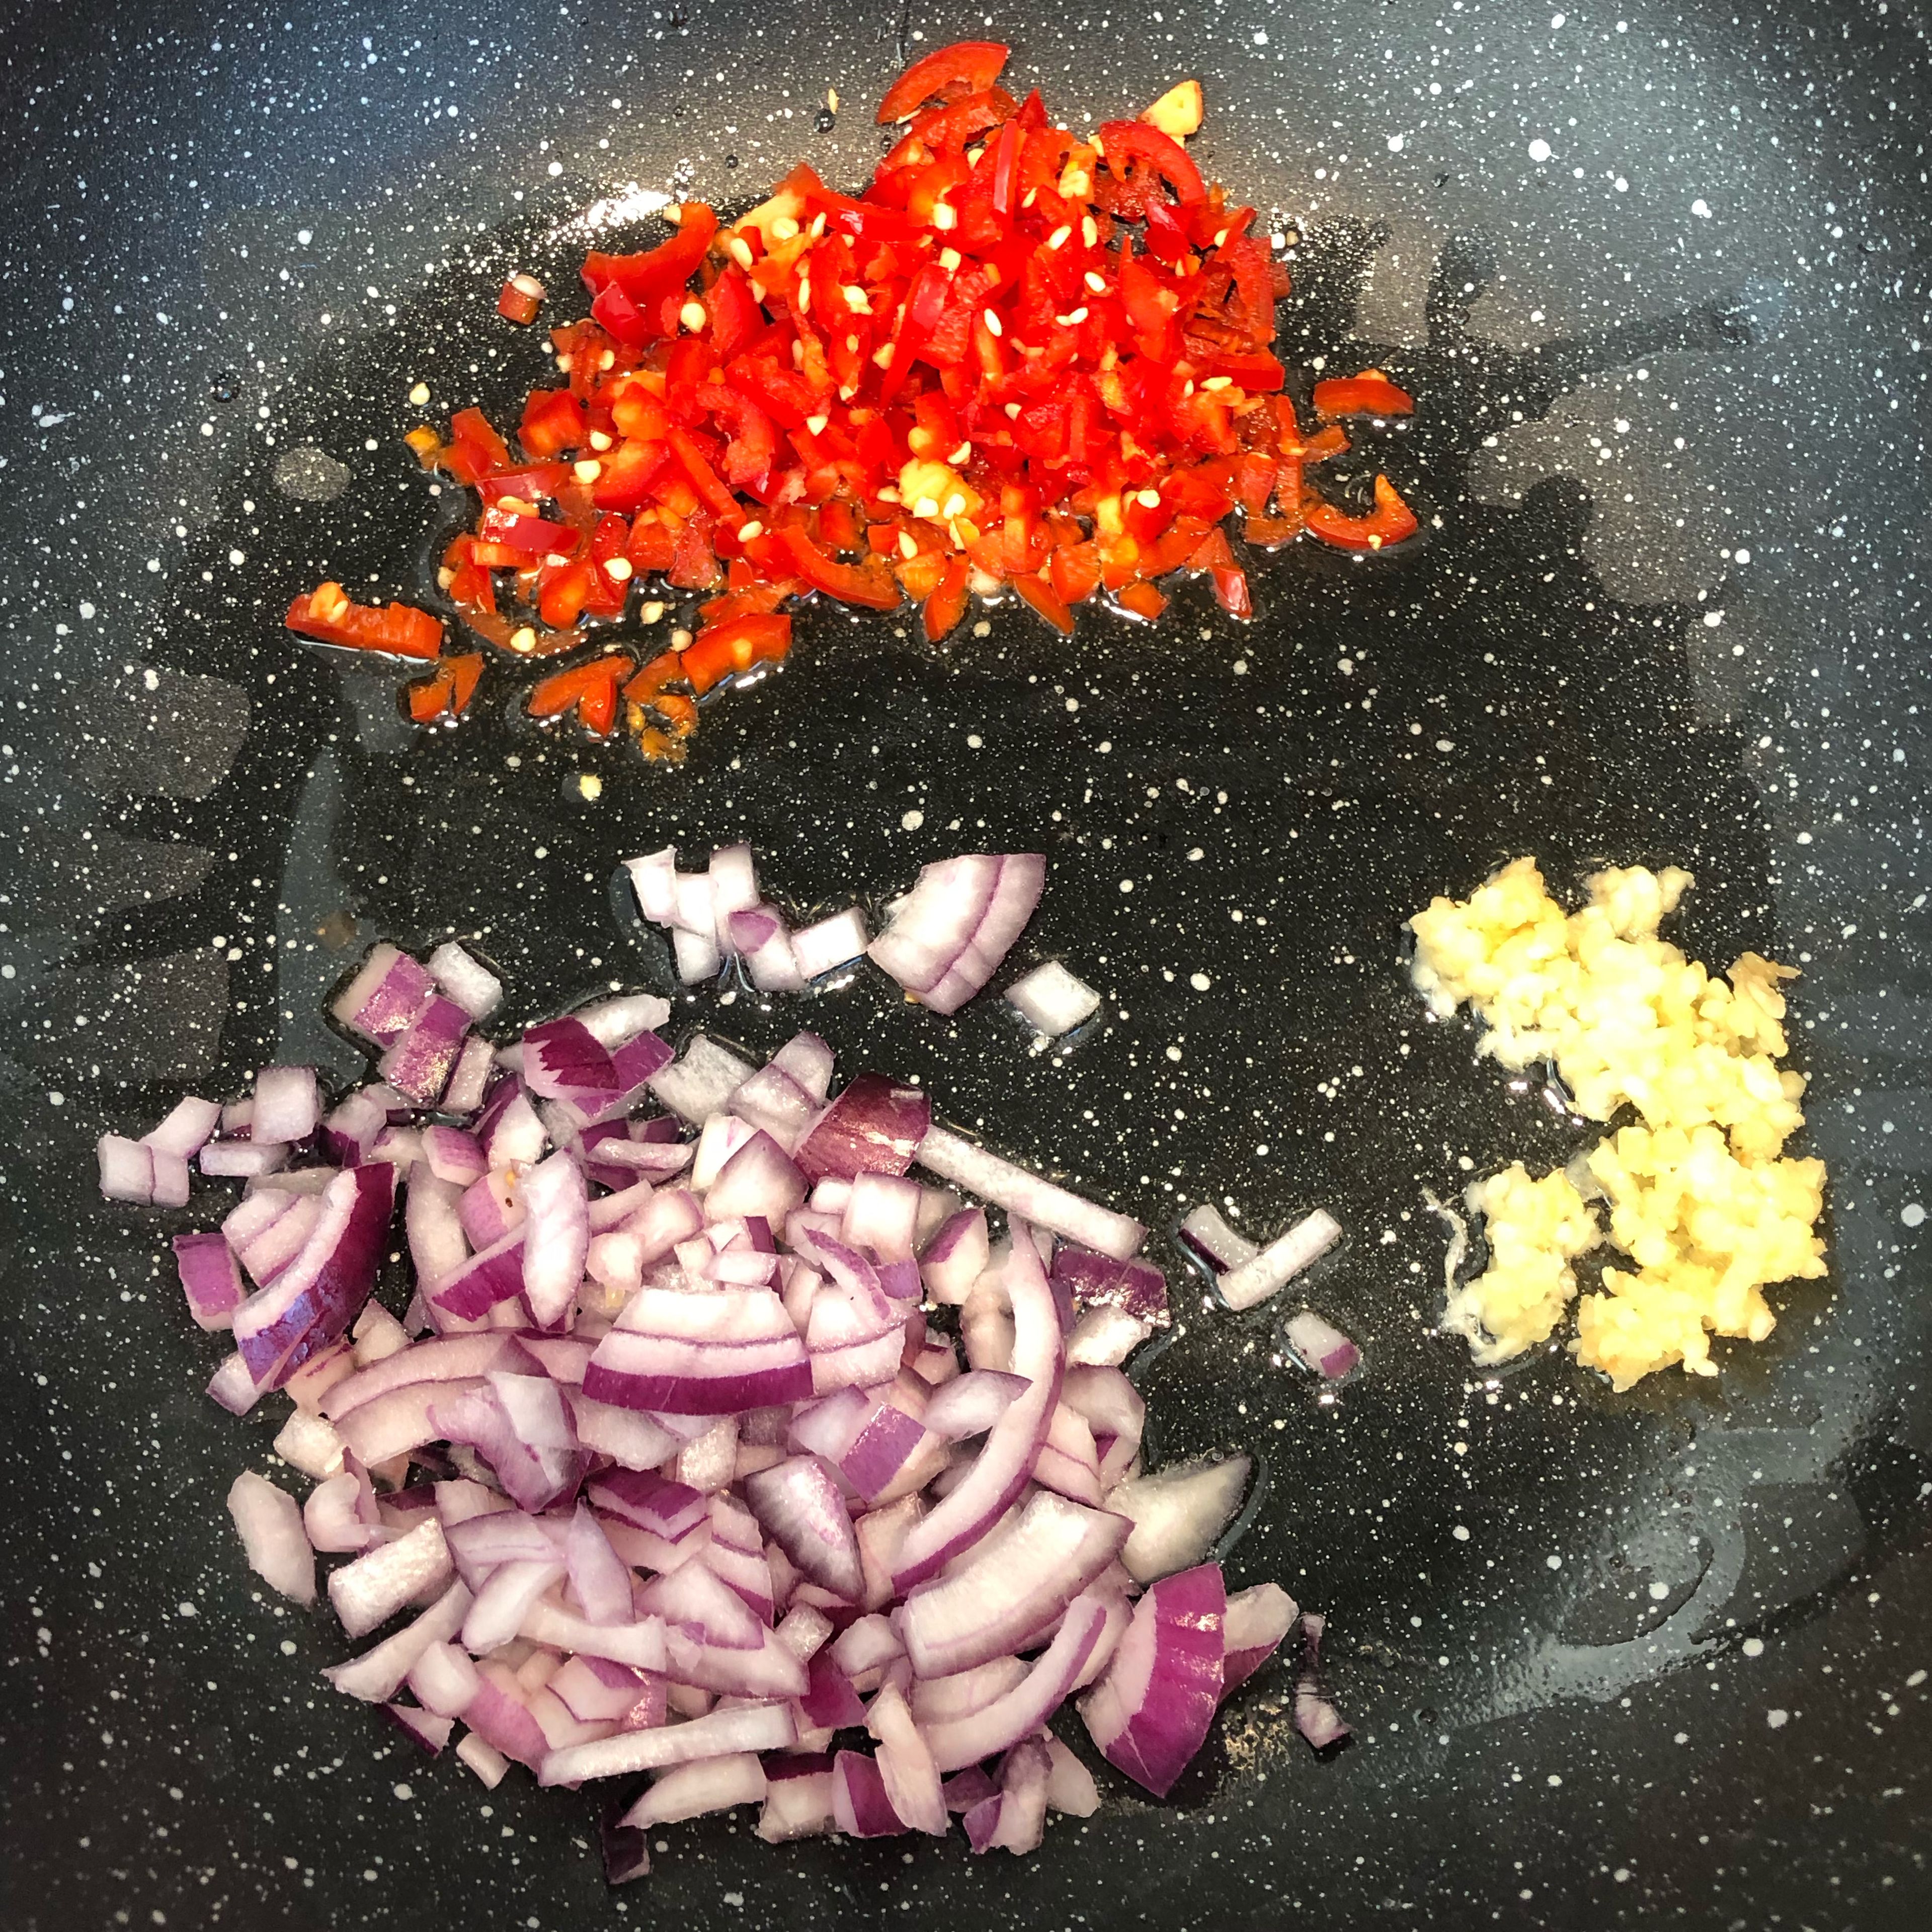 Add 25ml olive oil in pan and add garlic, onion and red pointed pepper. Stir vegetables on medium to high heat.